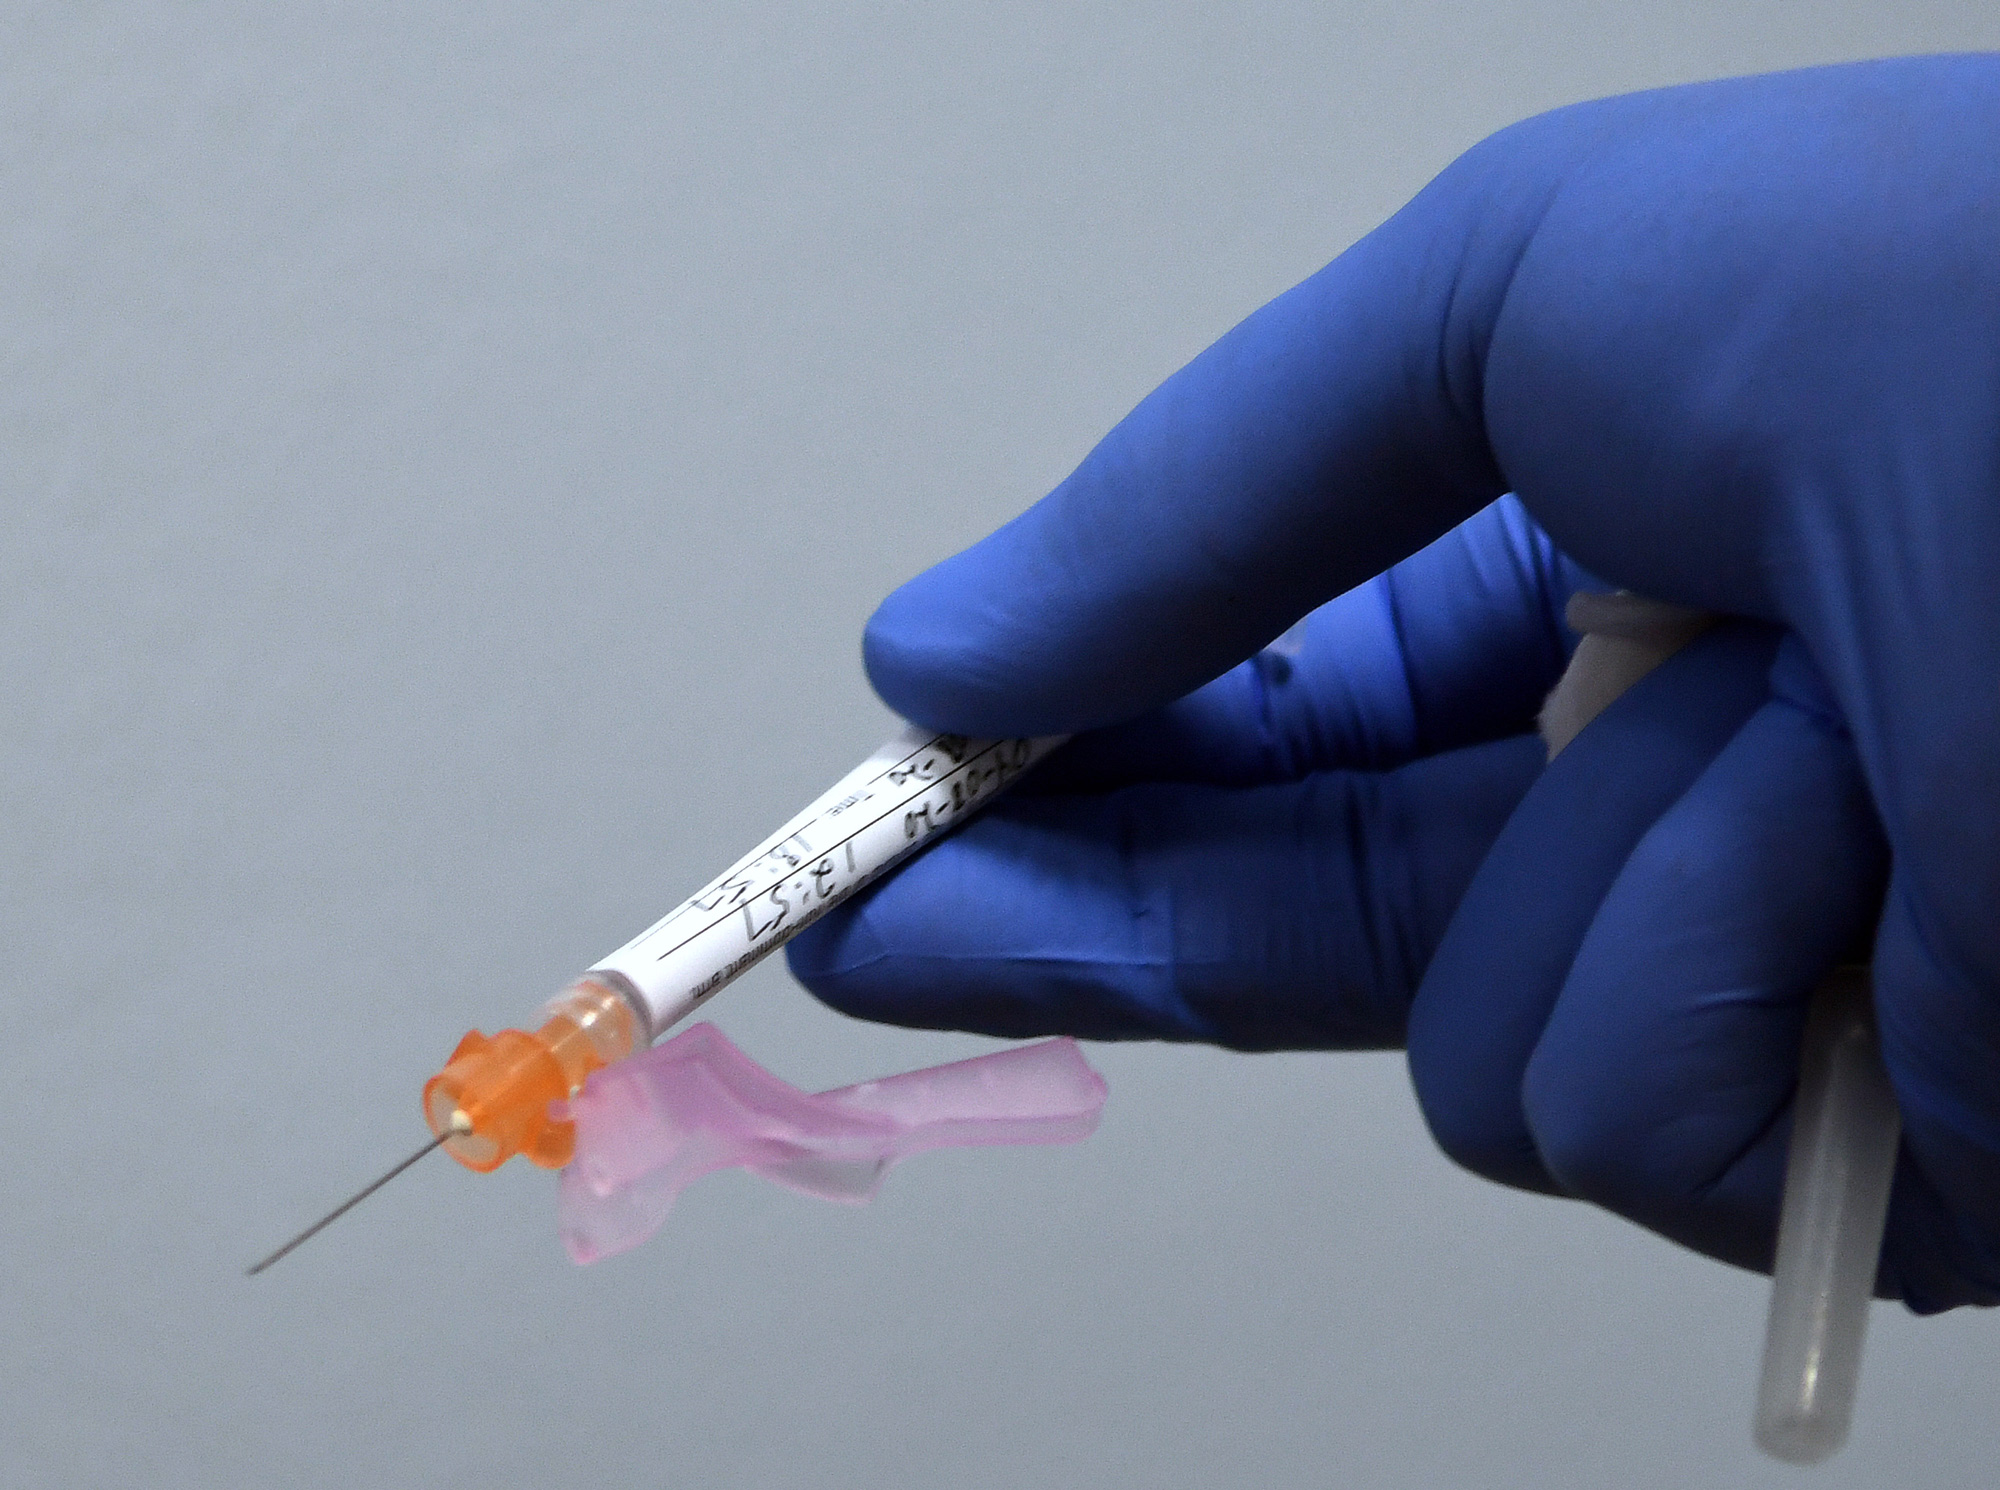 A syringe containing either a vaccine or a placebo is prepared for a participant in a Phase 3 COVID-19 vaccine clinical trial sponsored by Moderna at Accel Research Sites on August 4 in DeLand, Florida.